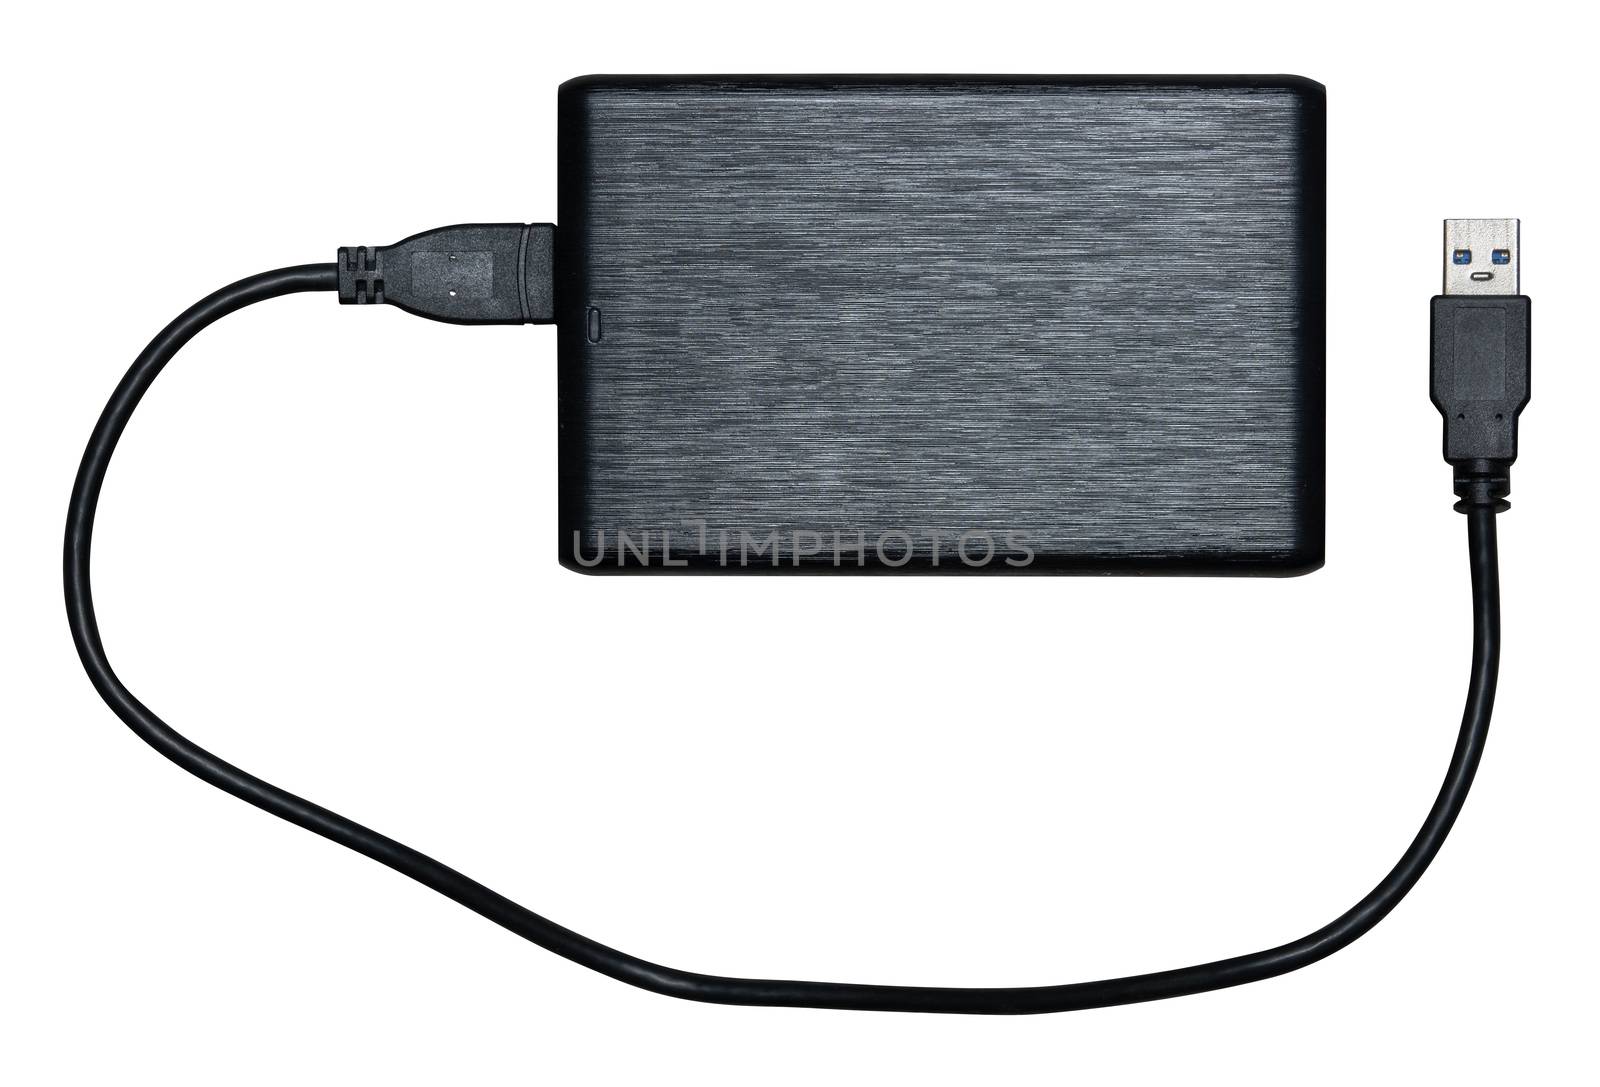 Isolated External USB Hard Disk by mrdoomits